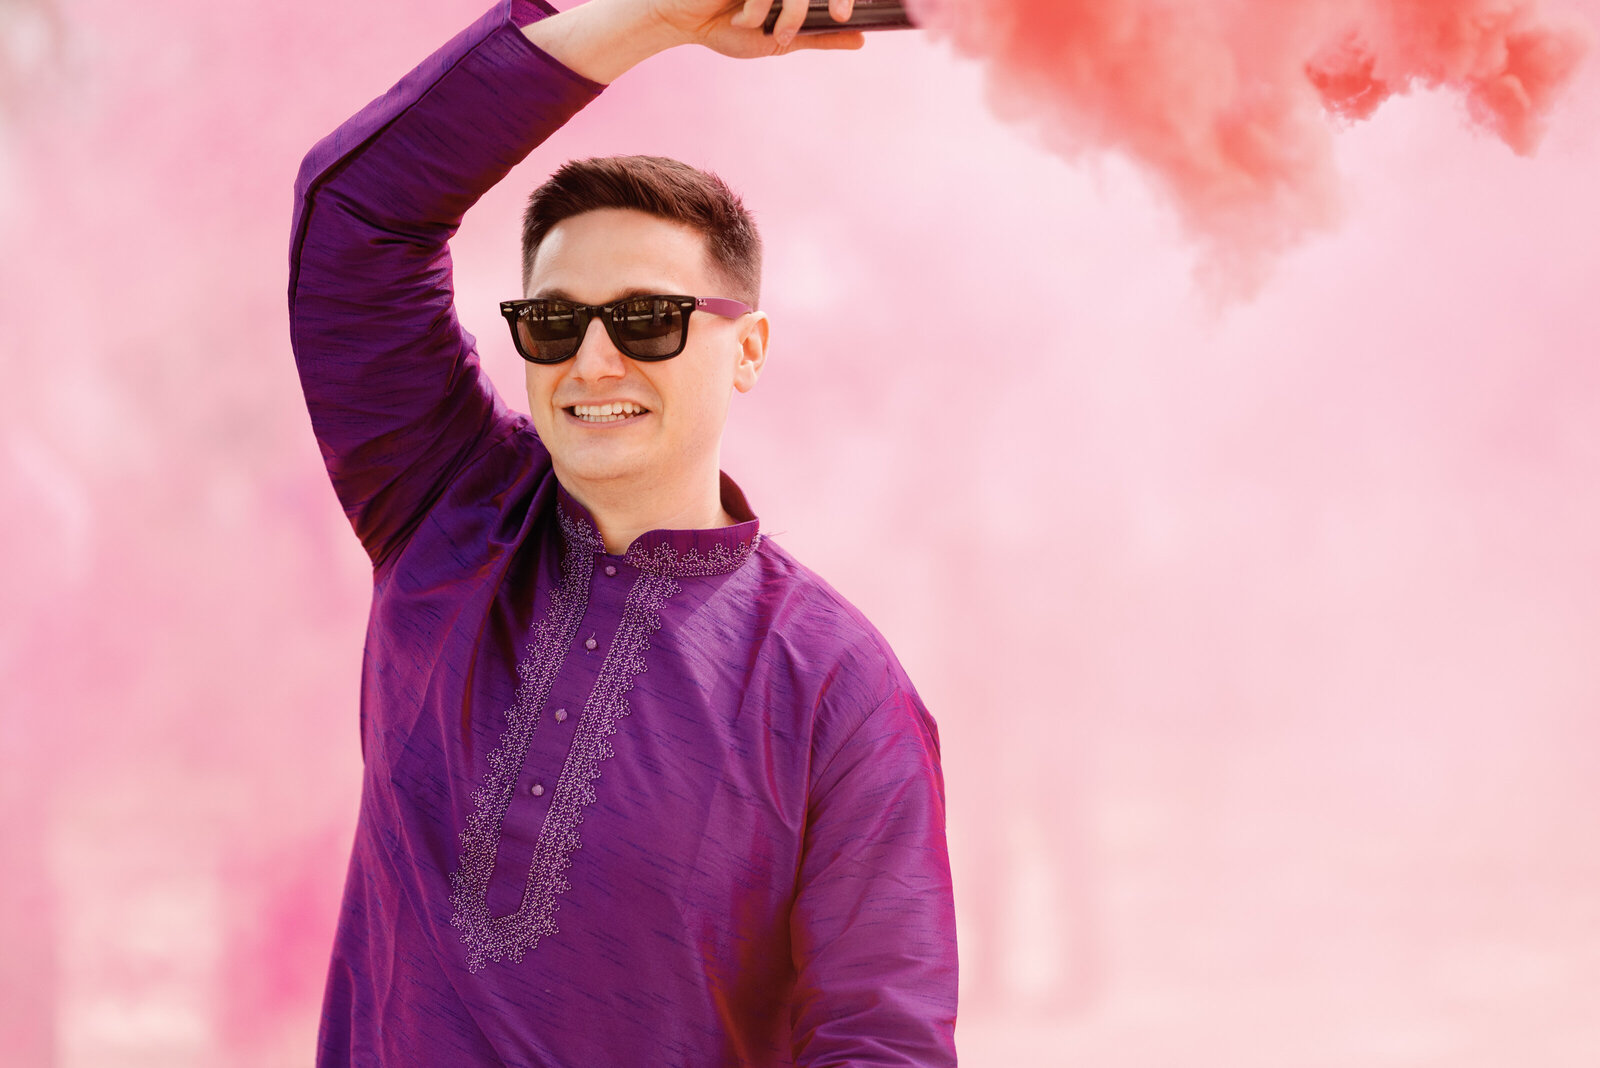 Groomsman with a colored smoke bomb, wearing sunglasses and a purple kurta during the Baraat